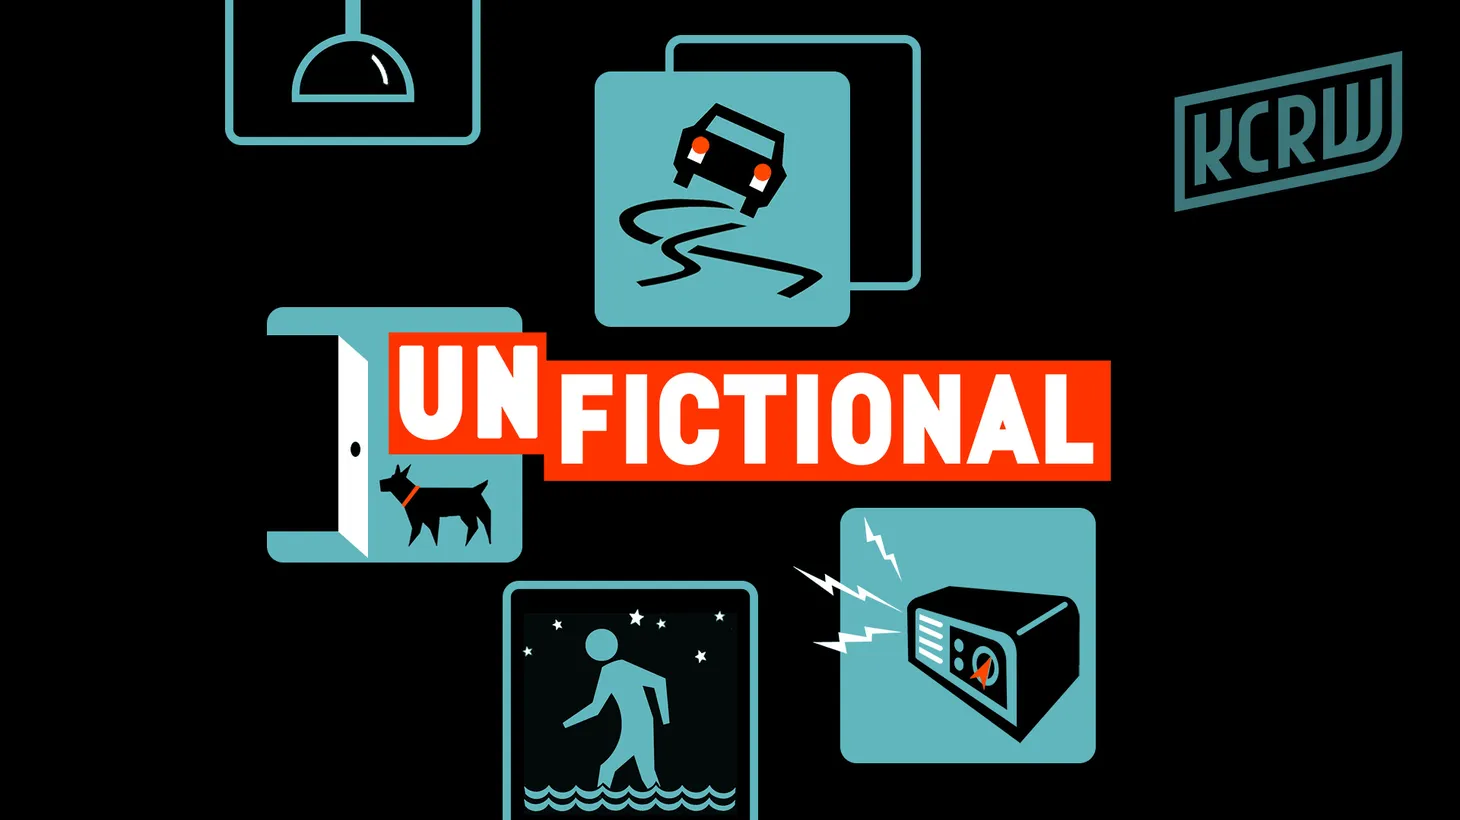 A whole year's worth of the best UnFictional stories packed into one hour. It's the UnFictional Holiday Special.